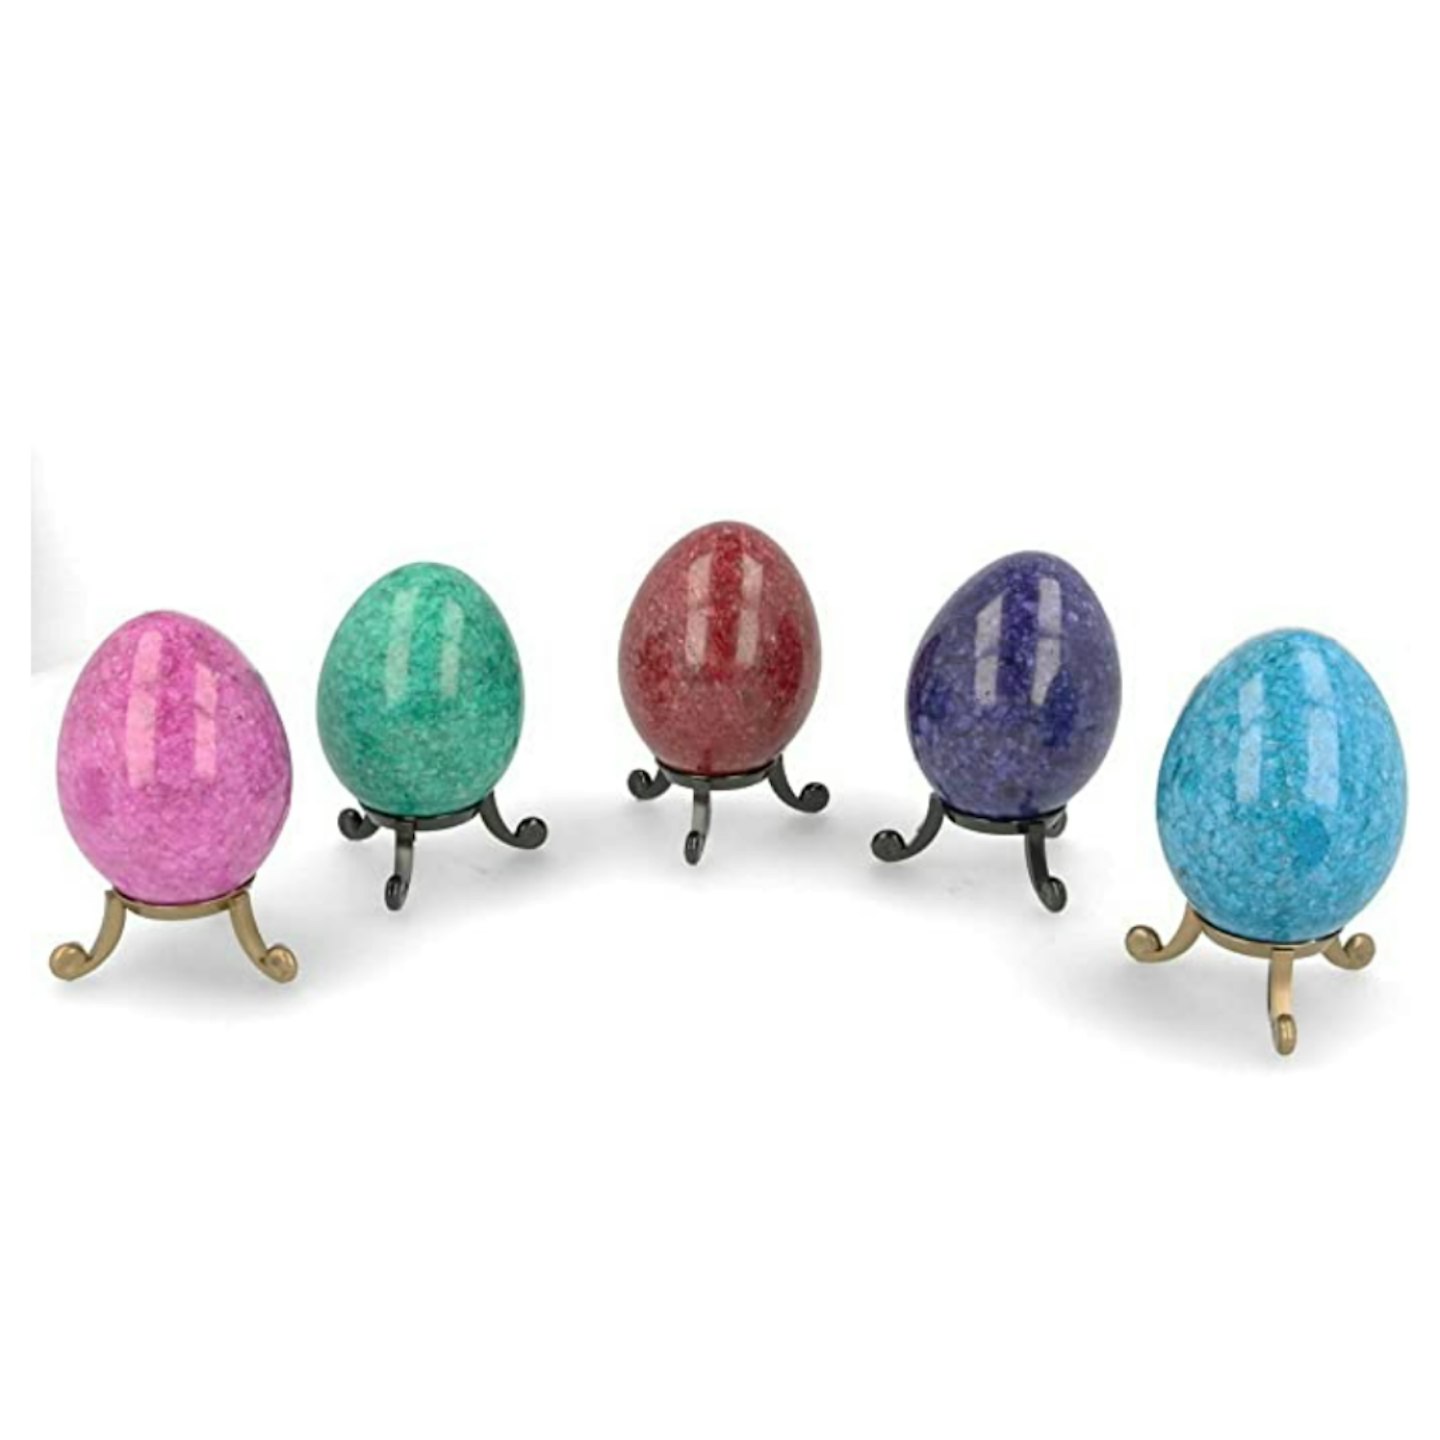 Set of 5 x 2" Genuine Himalayan Marble Eggs